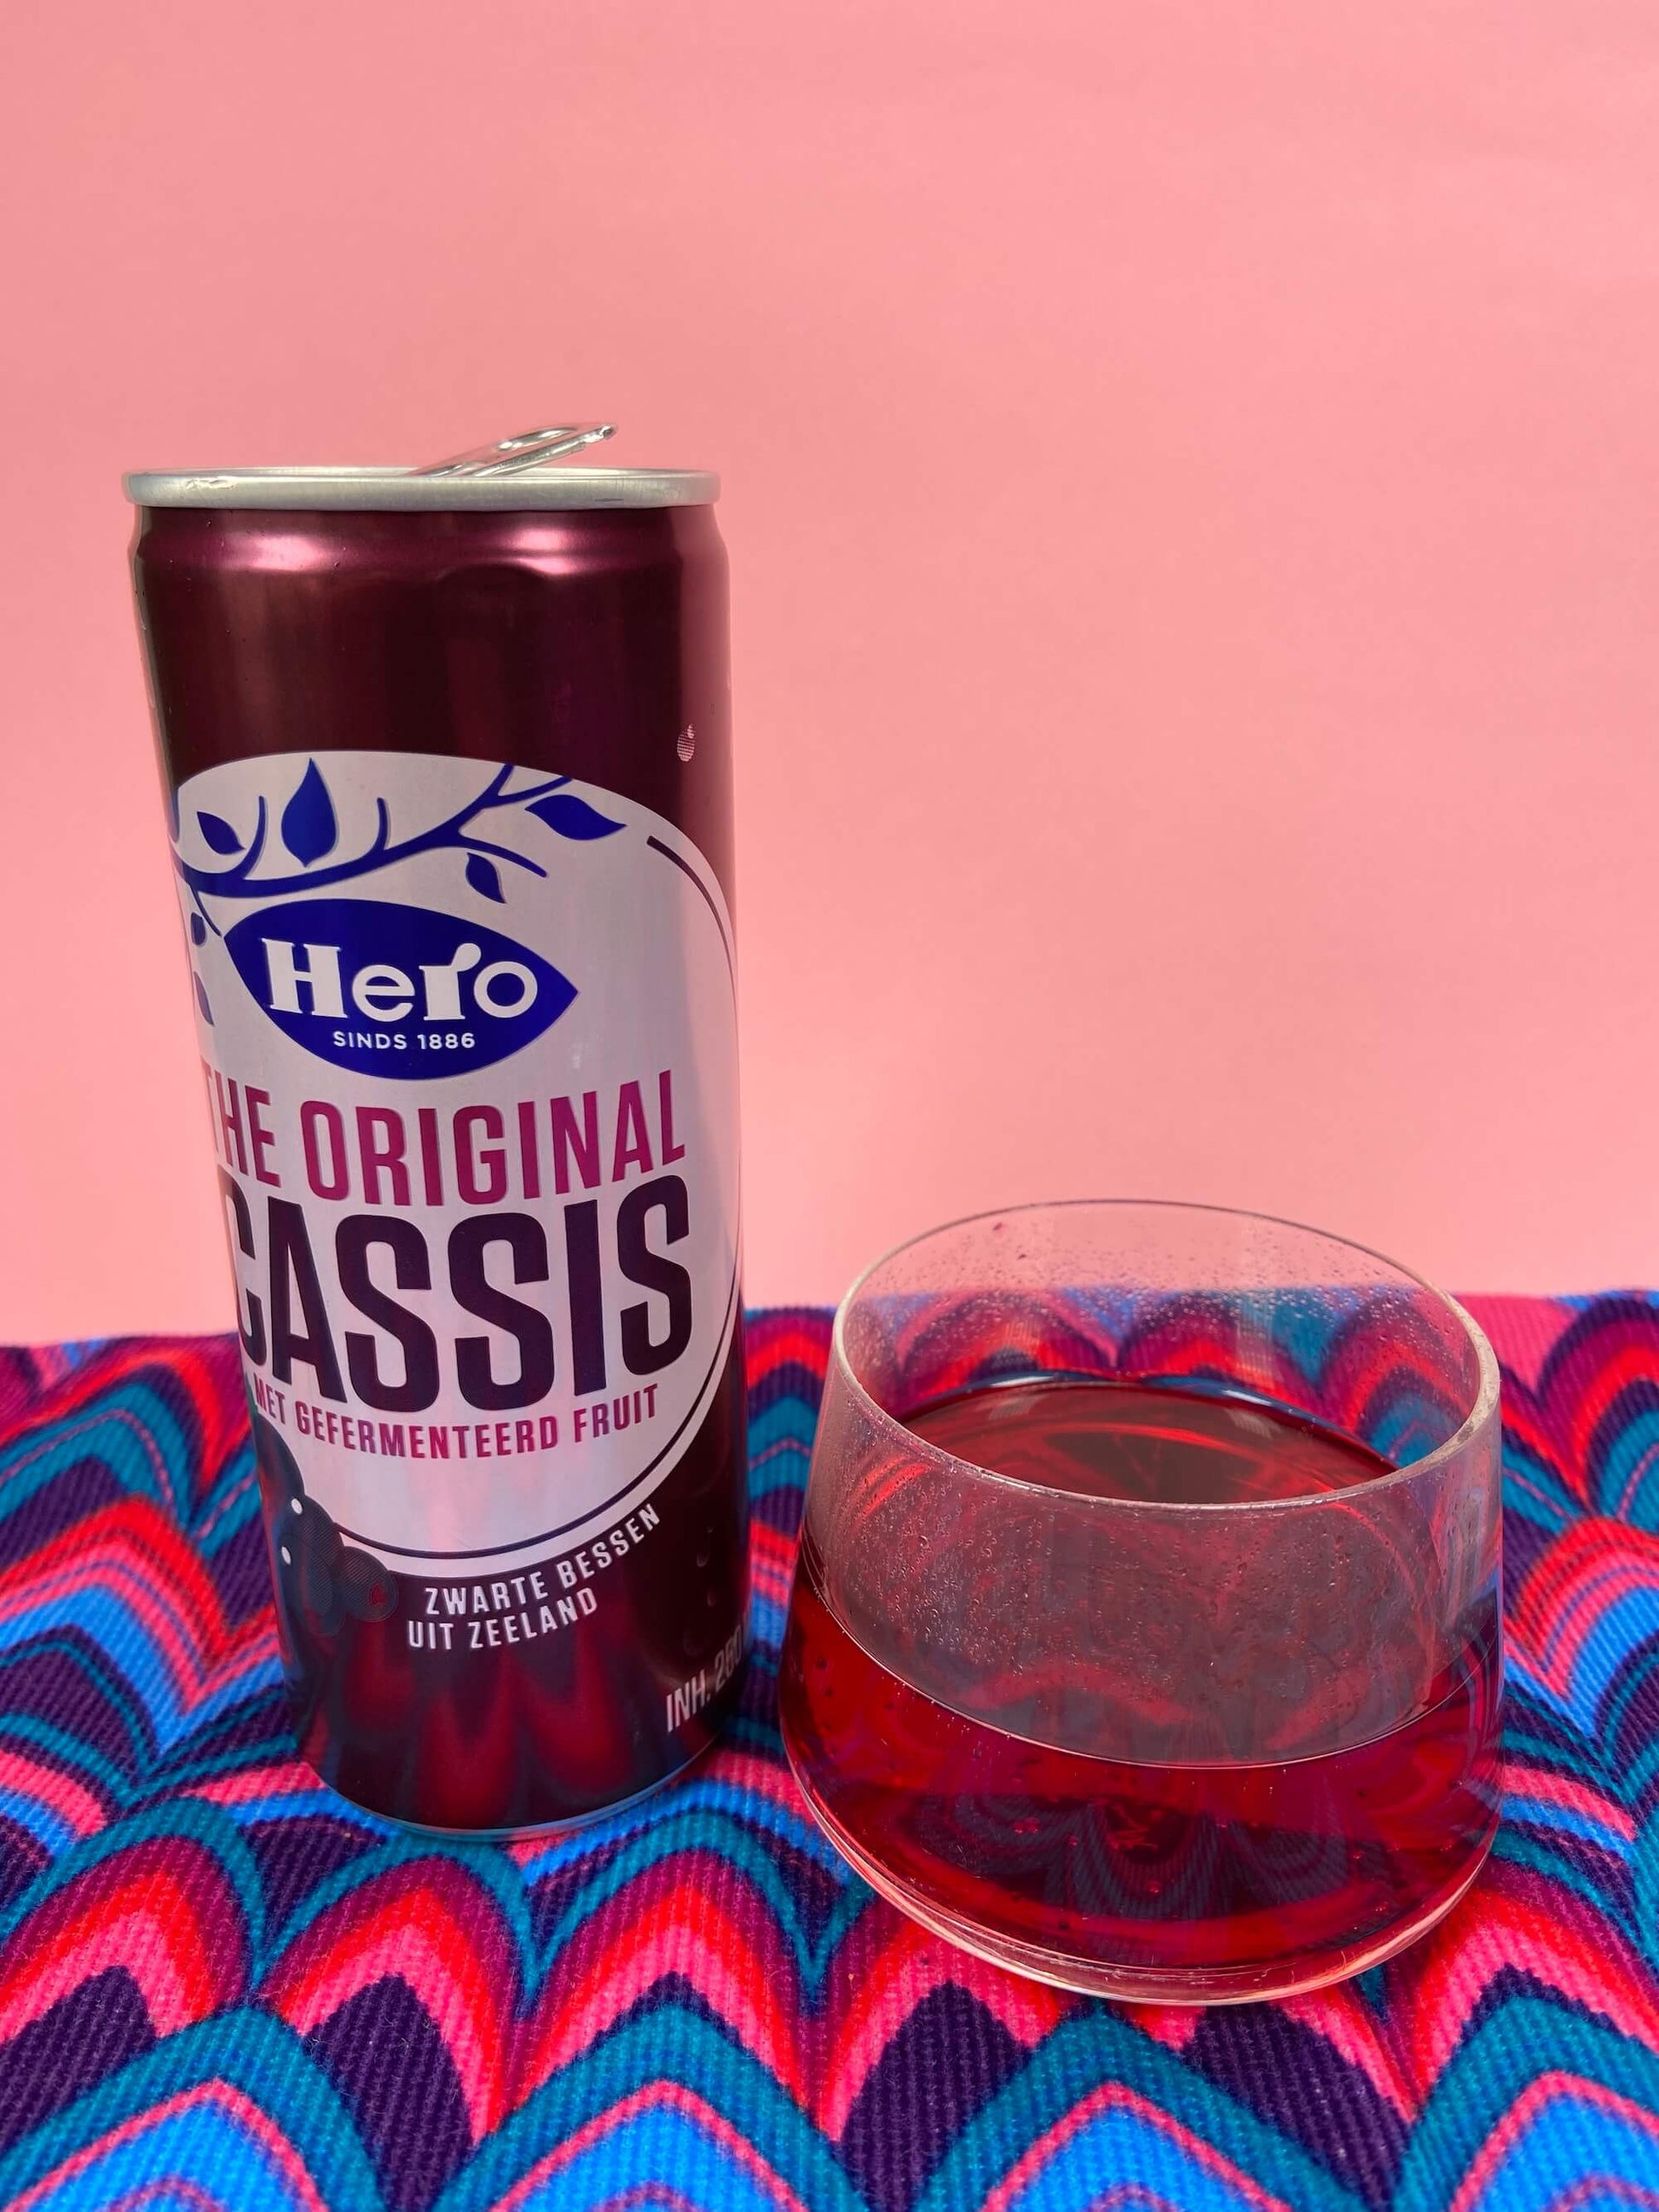 Can of Hero Cassis with glass - Black current drink - Big Bite Dutch Treats